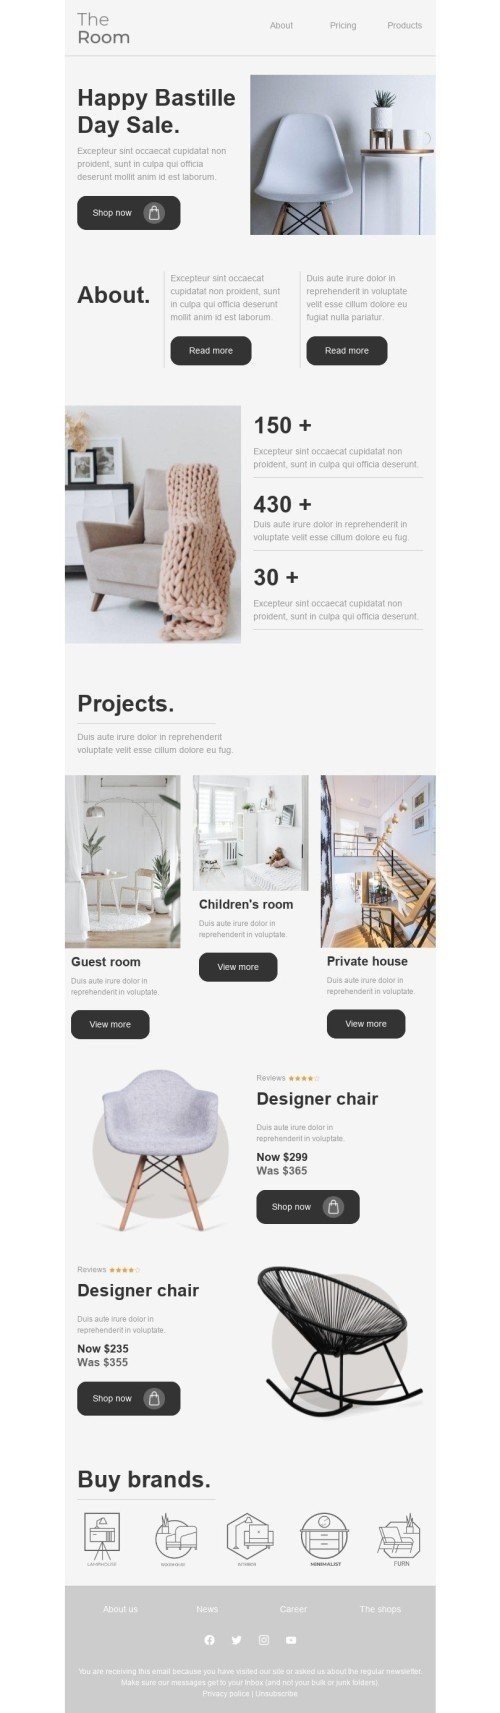 Bastille Day Email Template «The Room» for Furniture, Interior & DIY industry mobile view